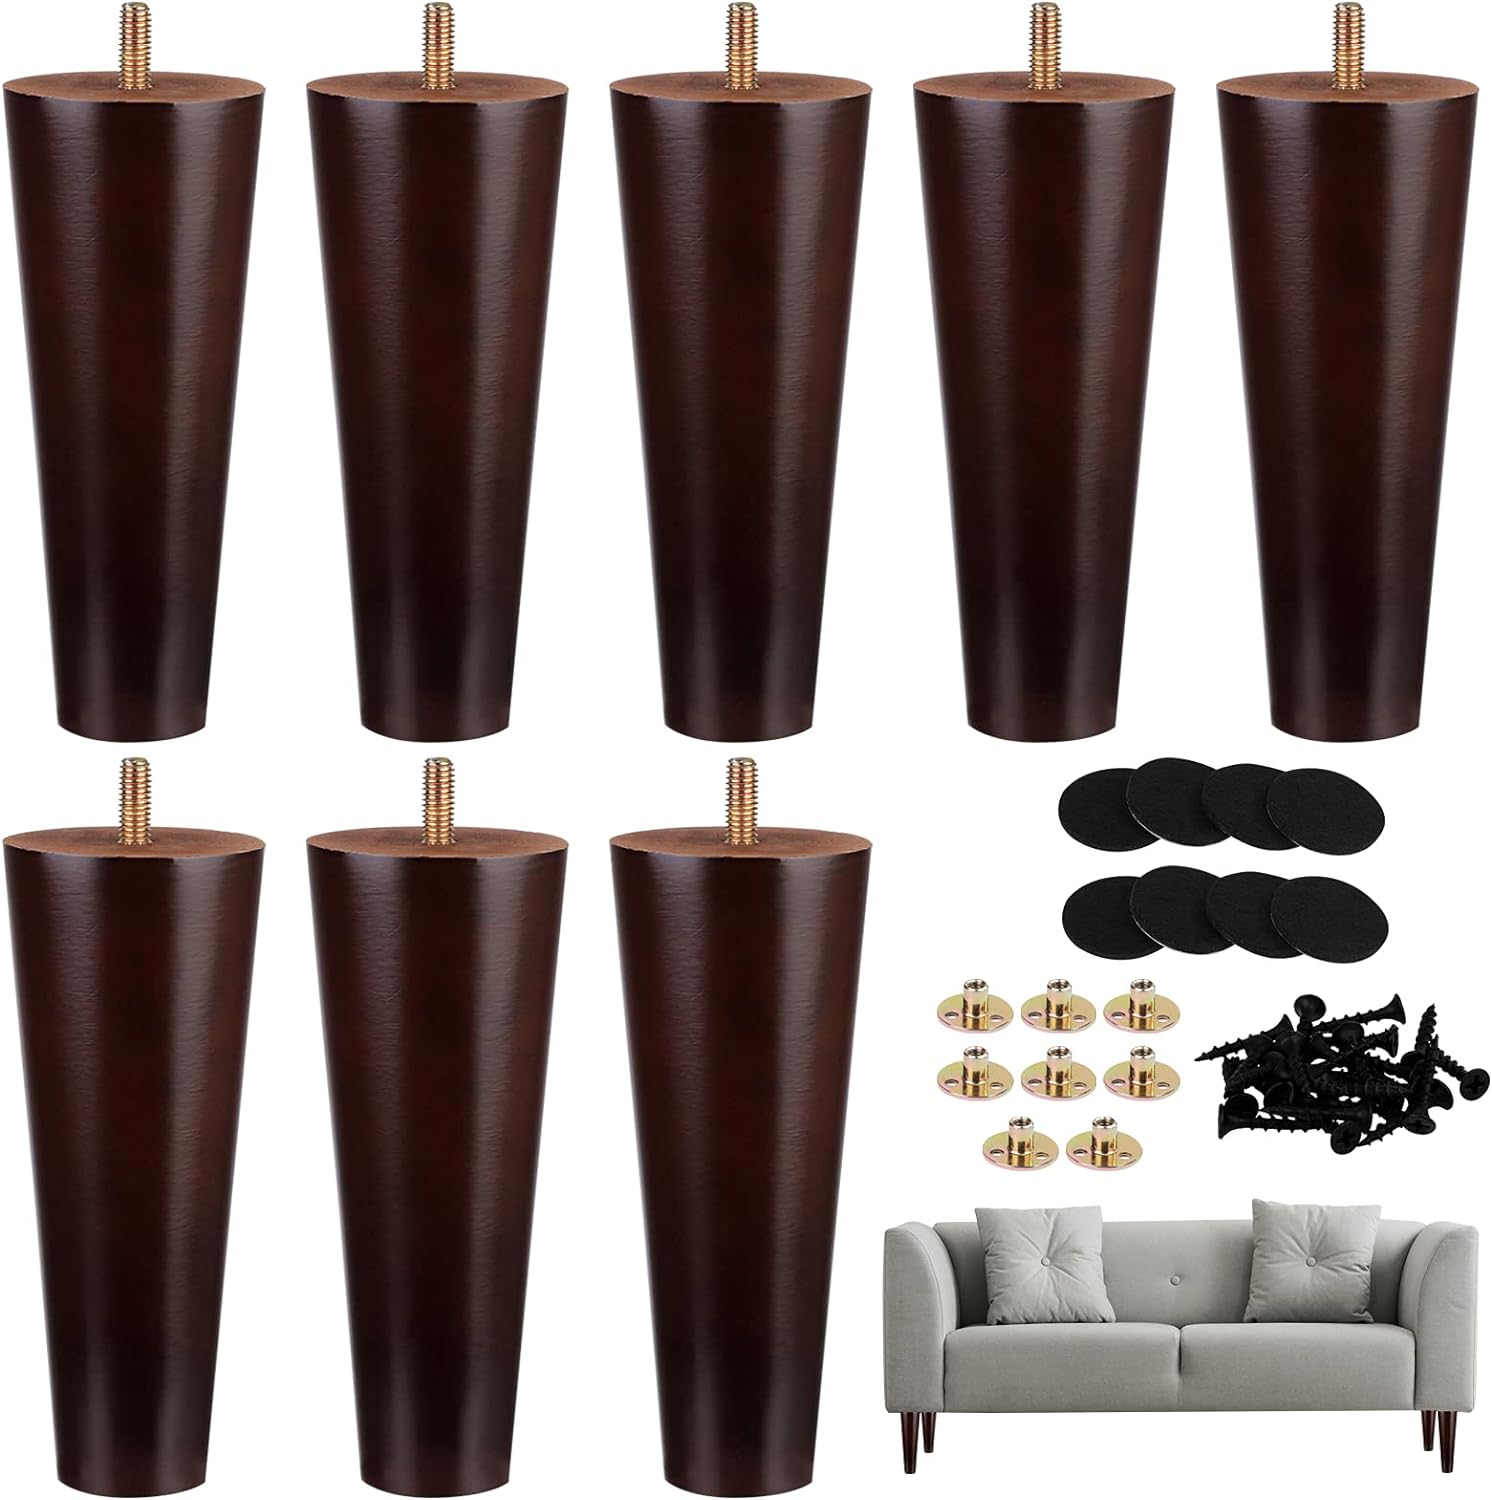 Furniture Couch Legs